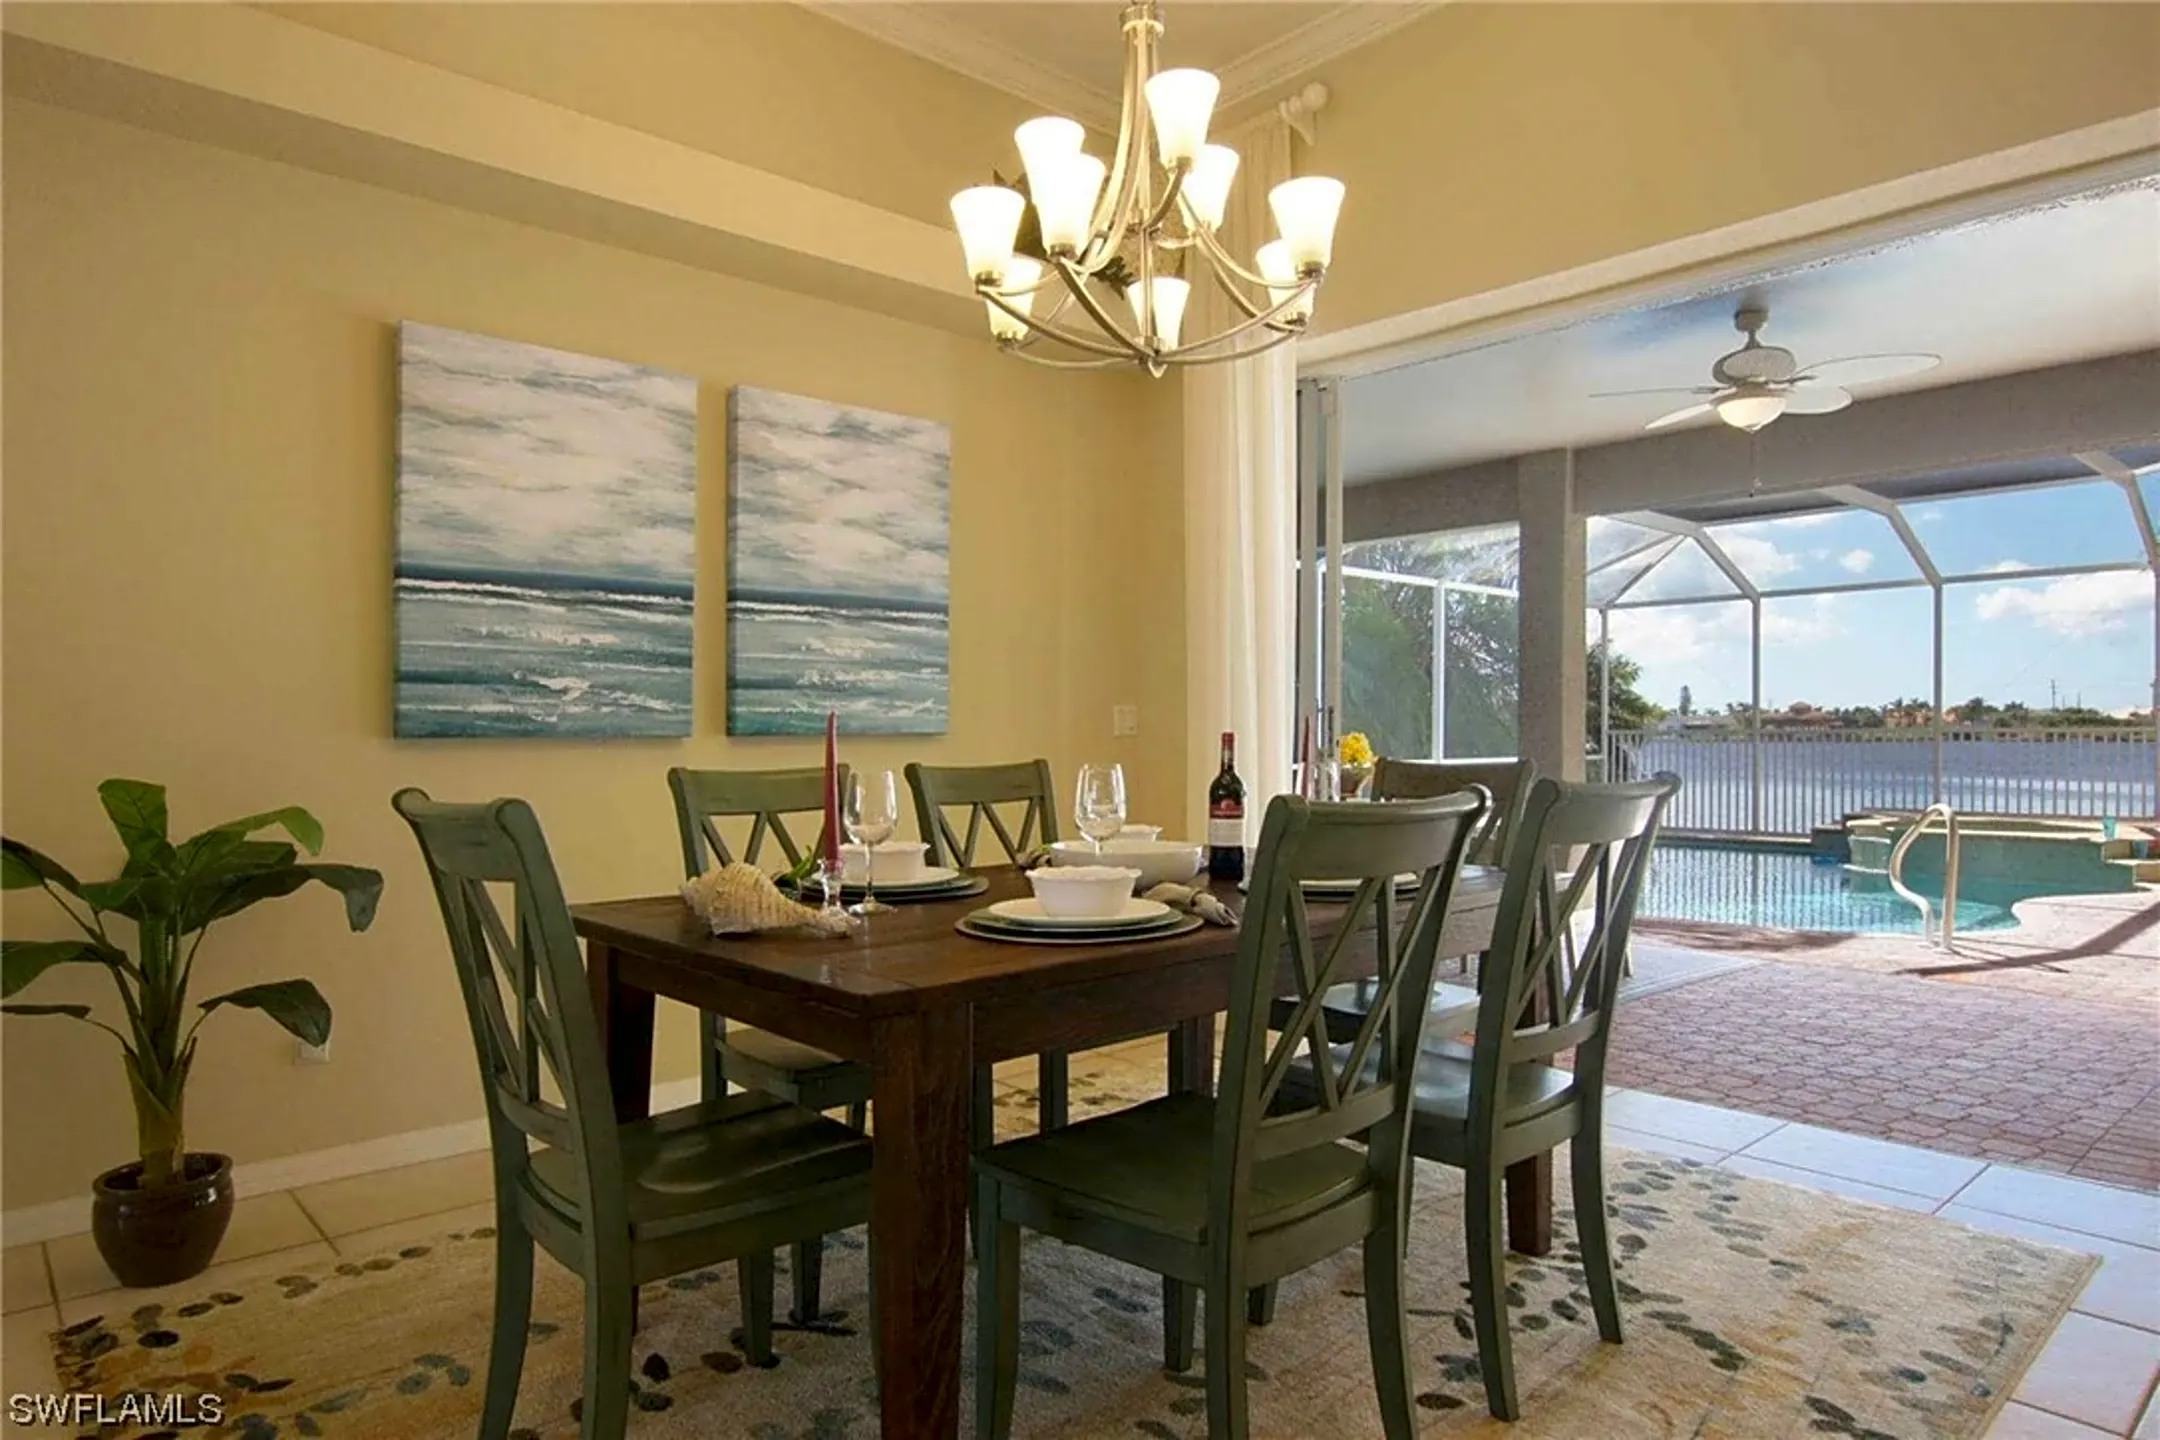 Dining Room - 4808 SW 5th Pl - Cape Coral, FL